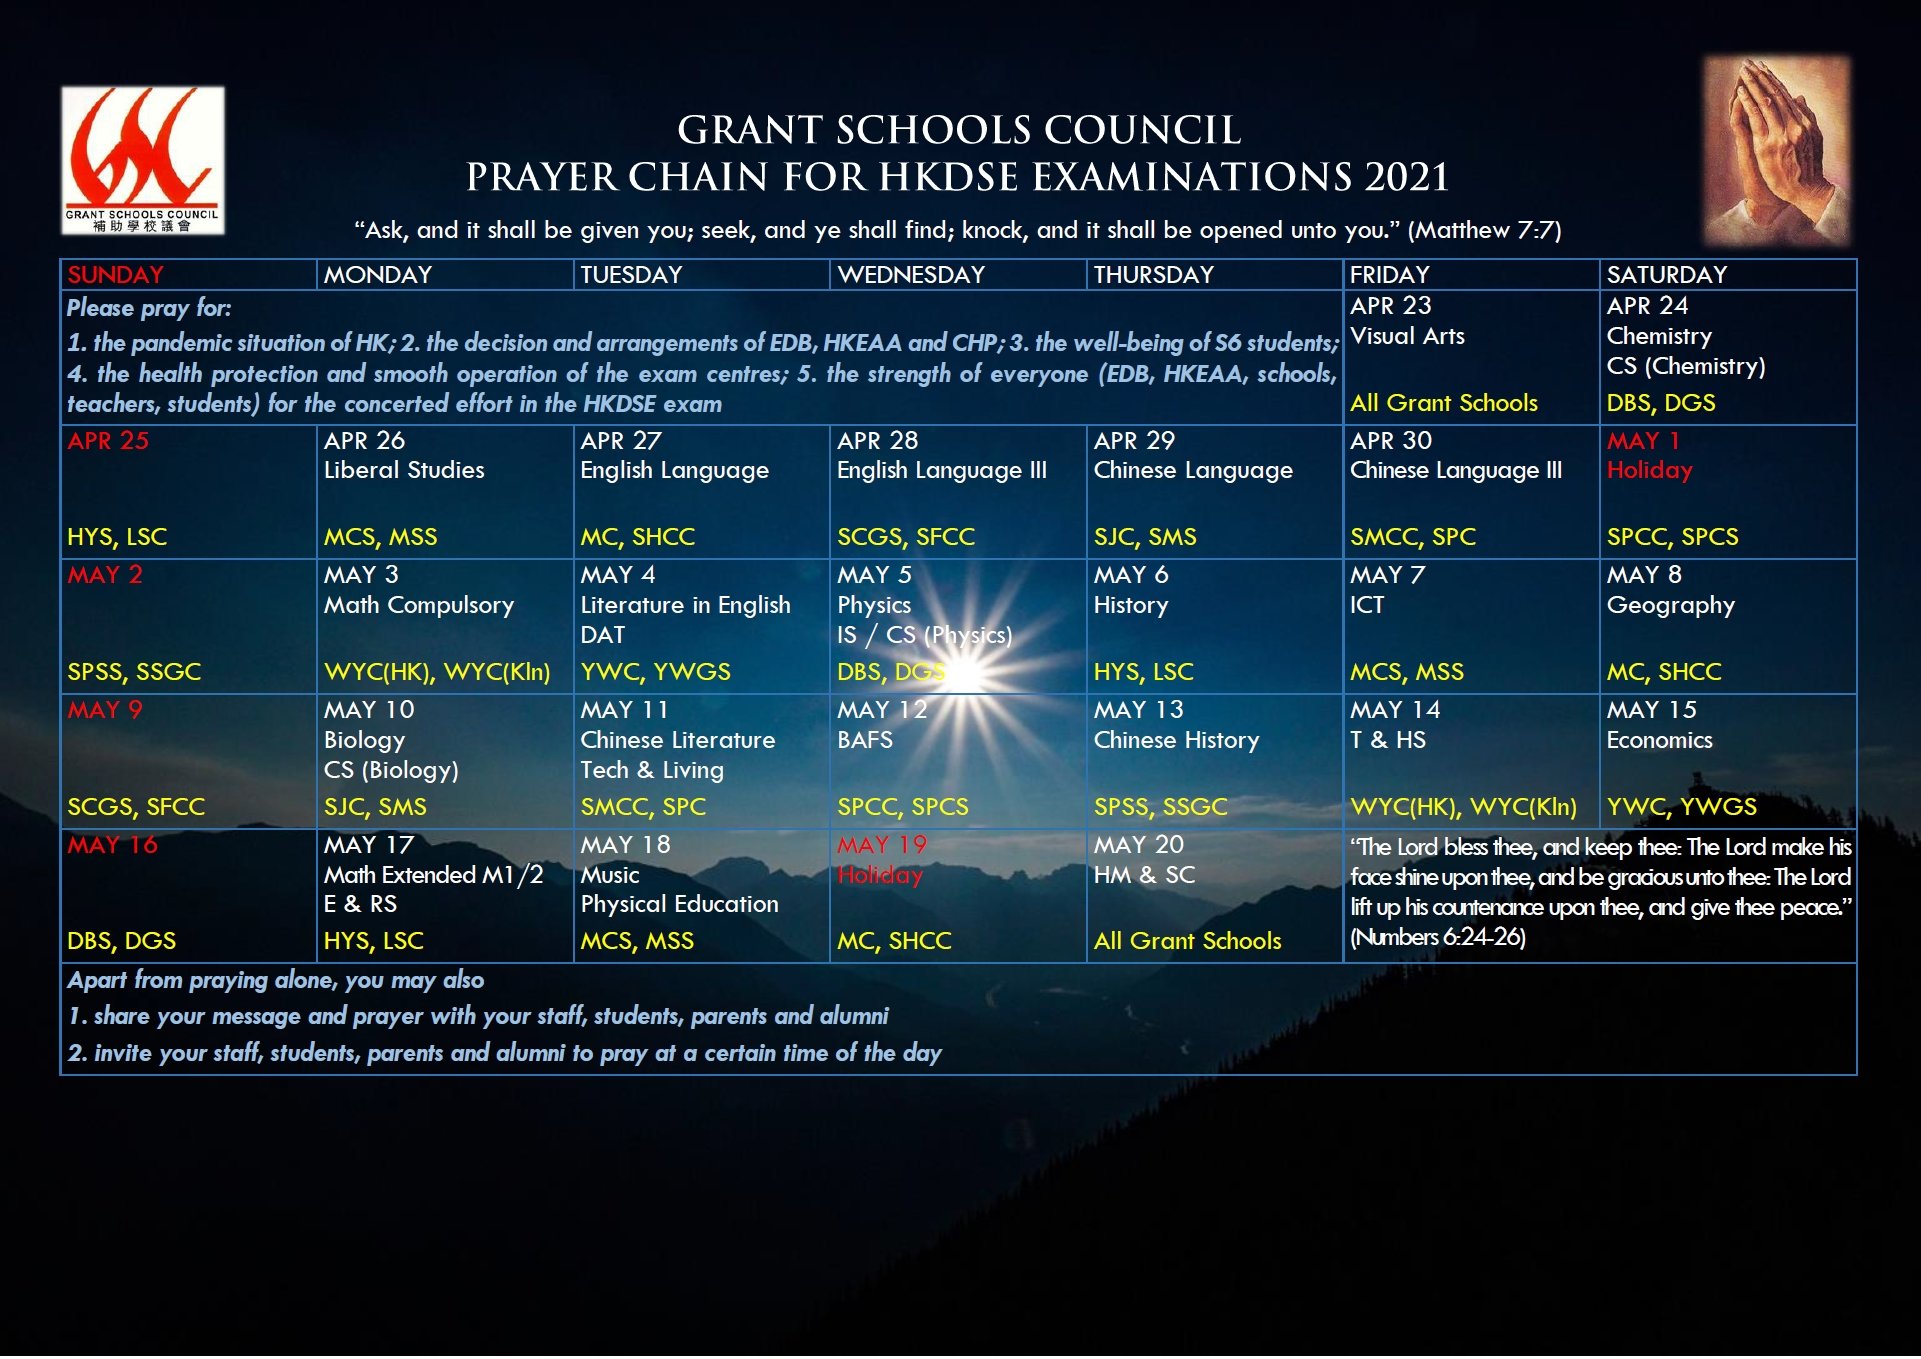 GSC Prayer Chain for HKDSE 2021